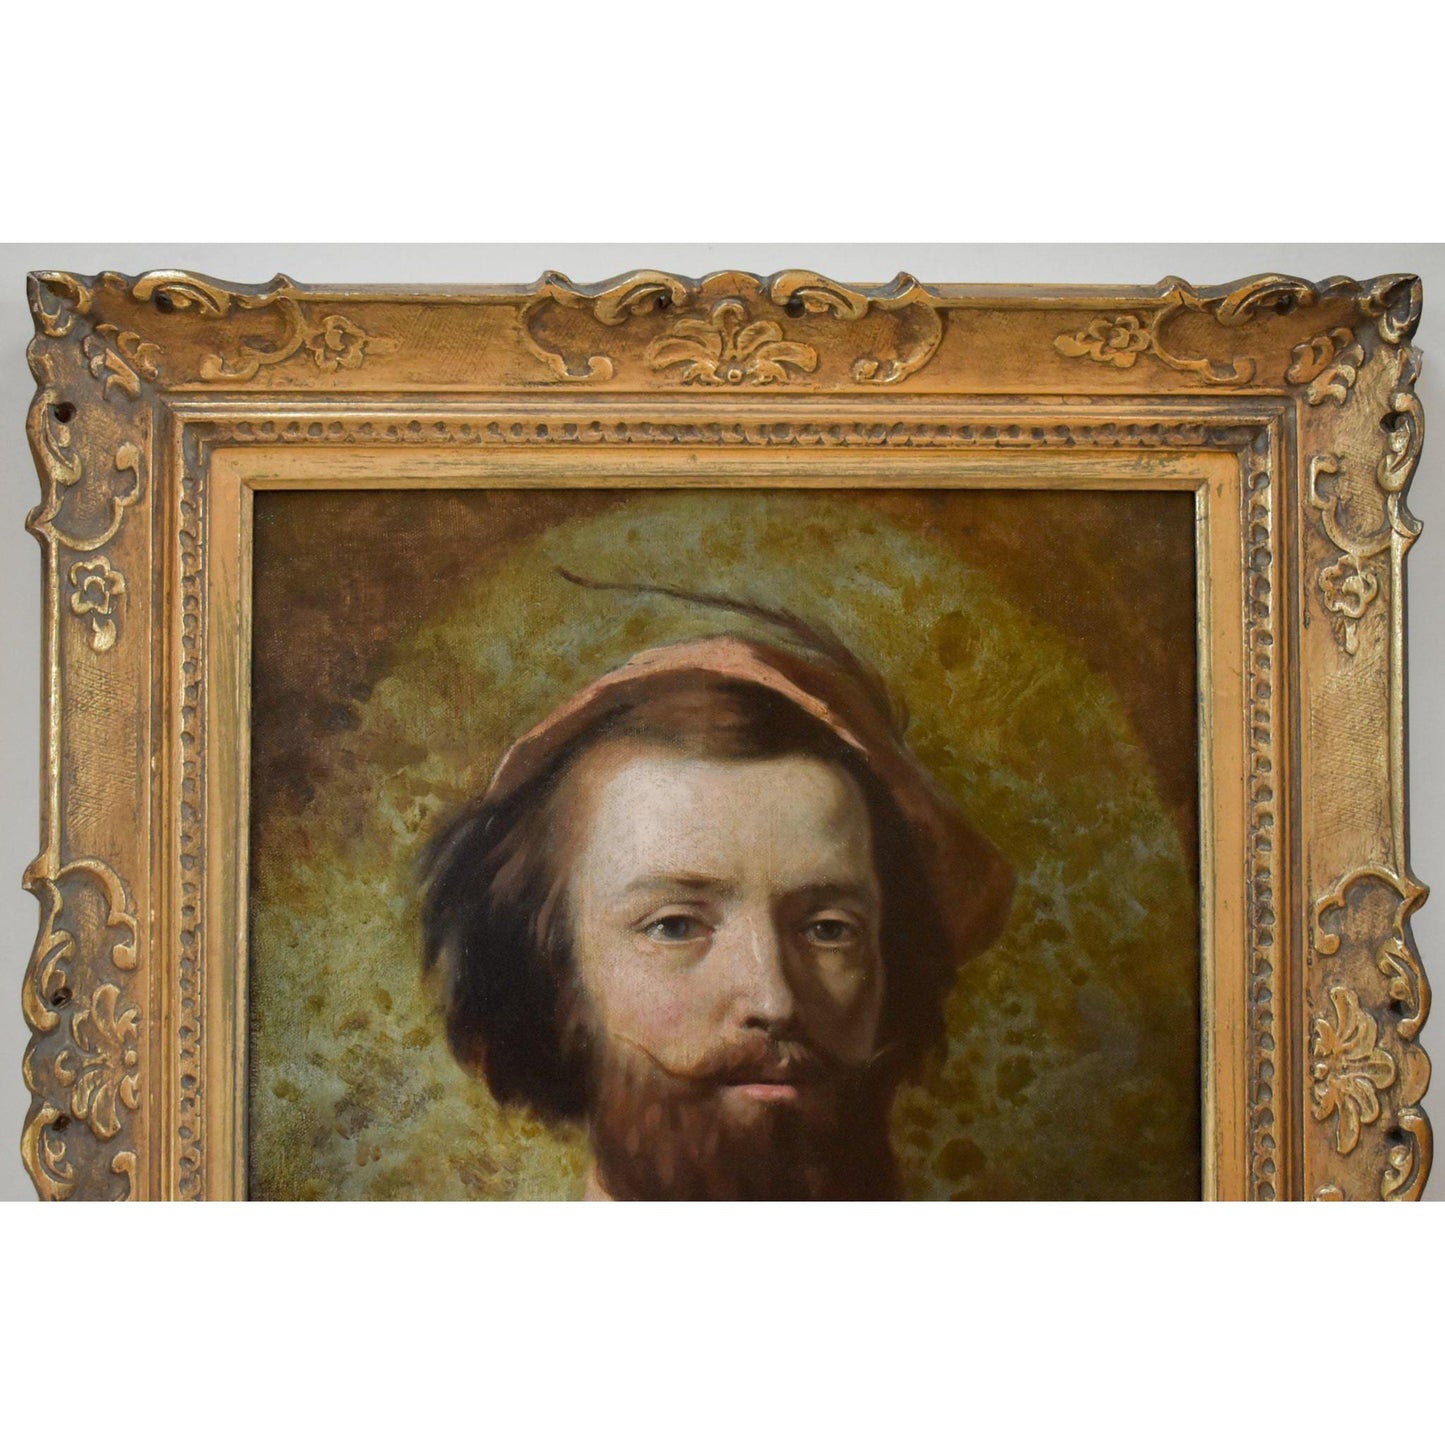 Antique portrait painting bearded man medieval clothing original 1865 by Hippolyte Bellange for sale at Winckelmann Gallery